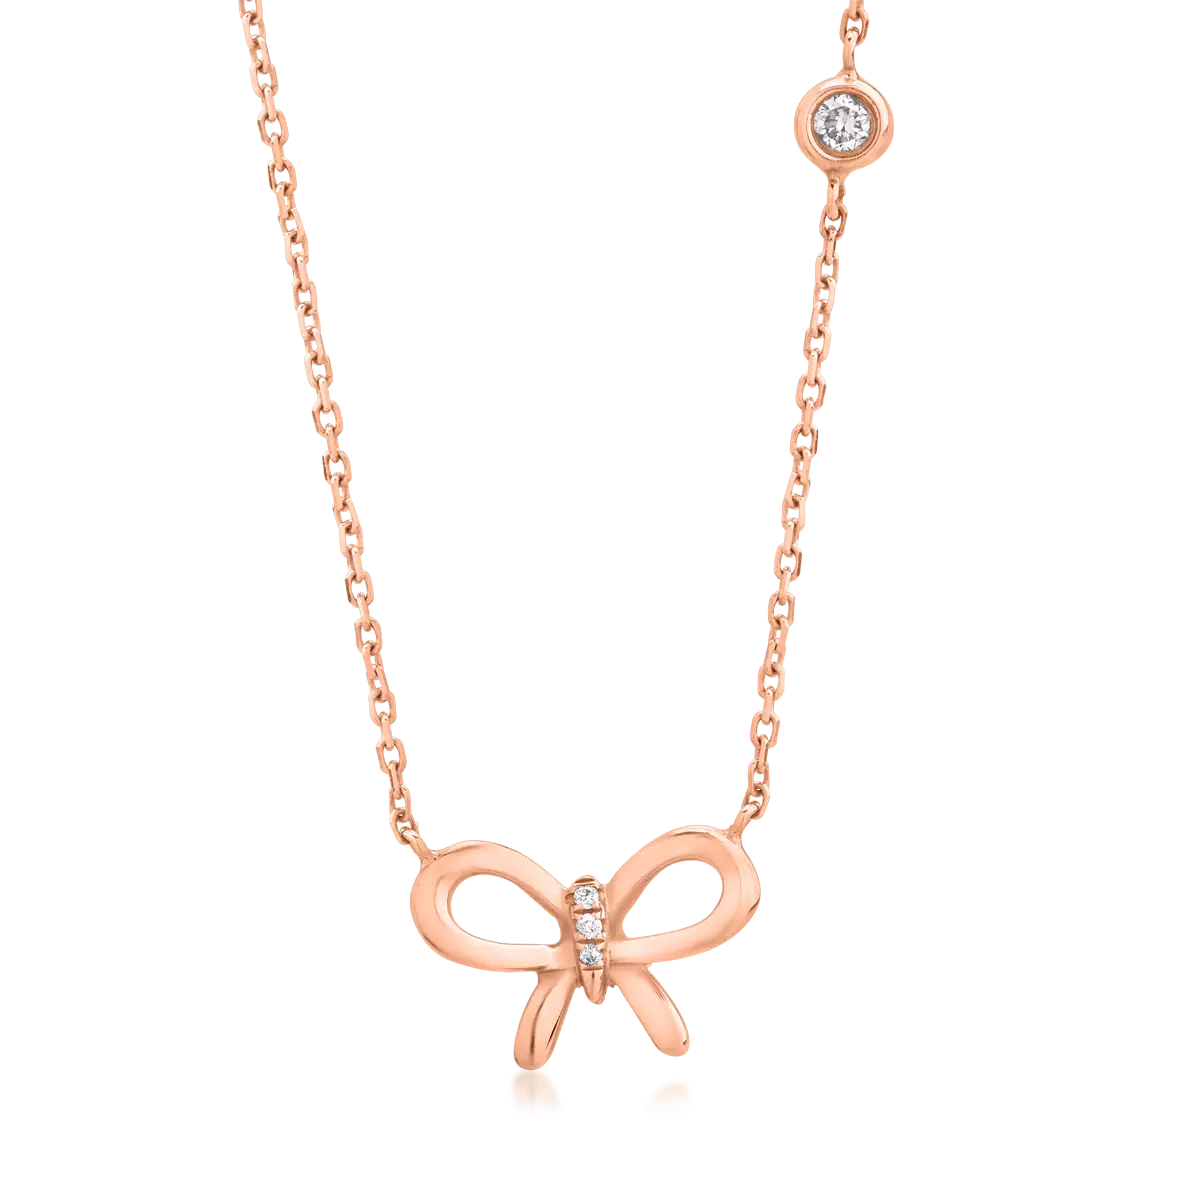 18K rose gold knot pendant chain with 0.026ct diamond and 0.009ct diamonds